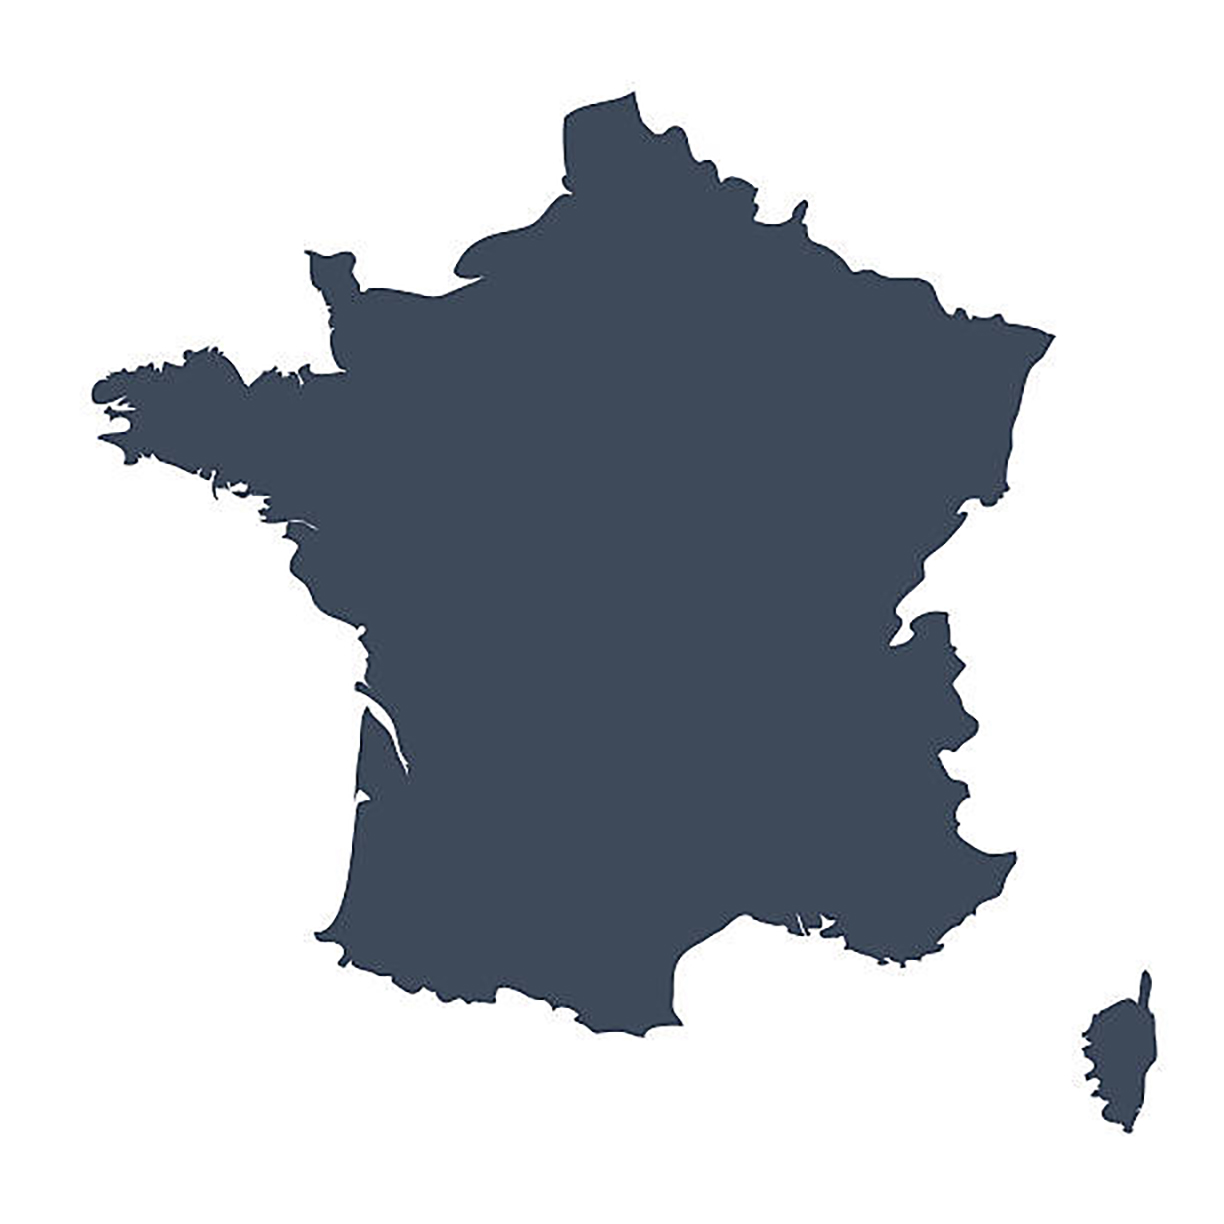 france-country-map-vector-id470863184 copie